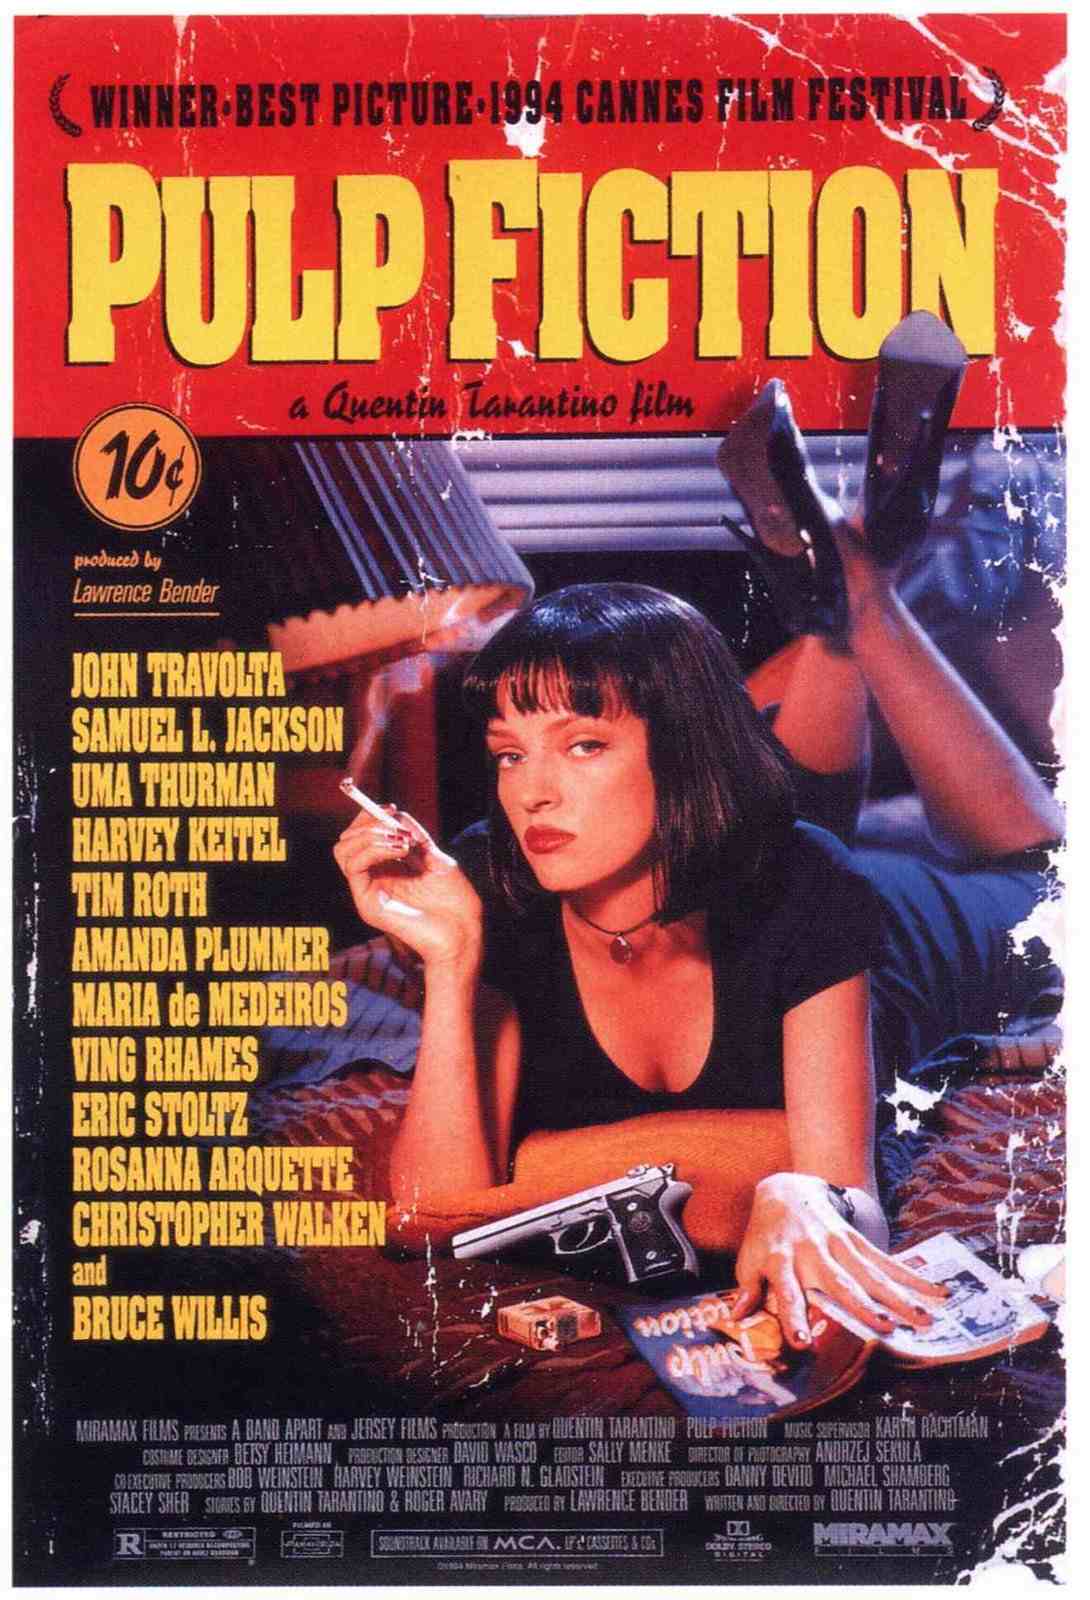 Bonbon recommend best of friction pussy submission parody pulp